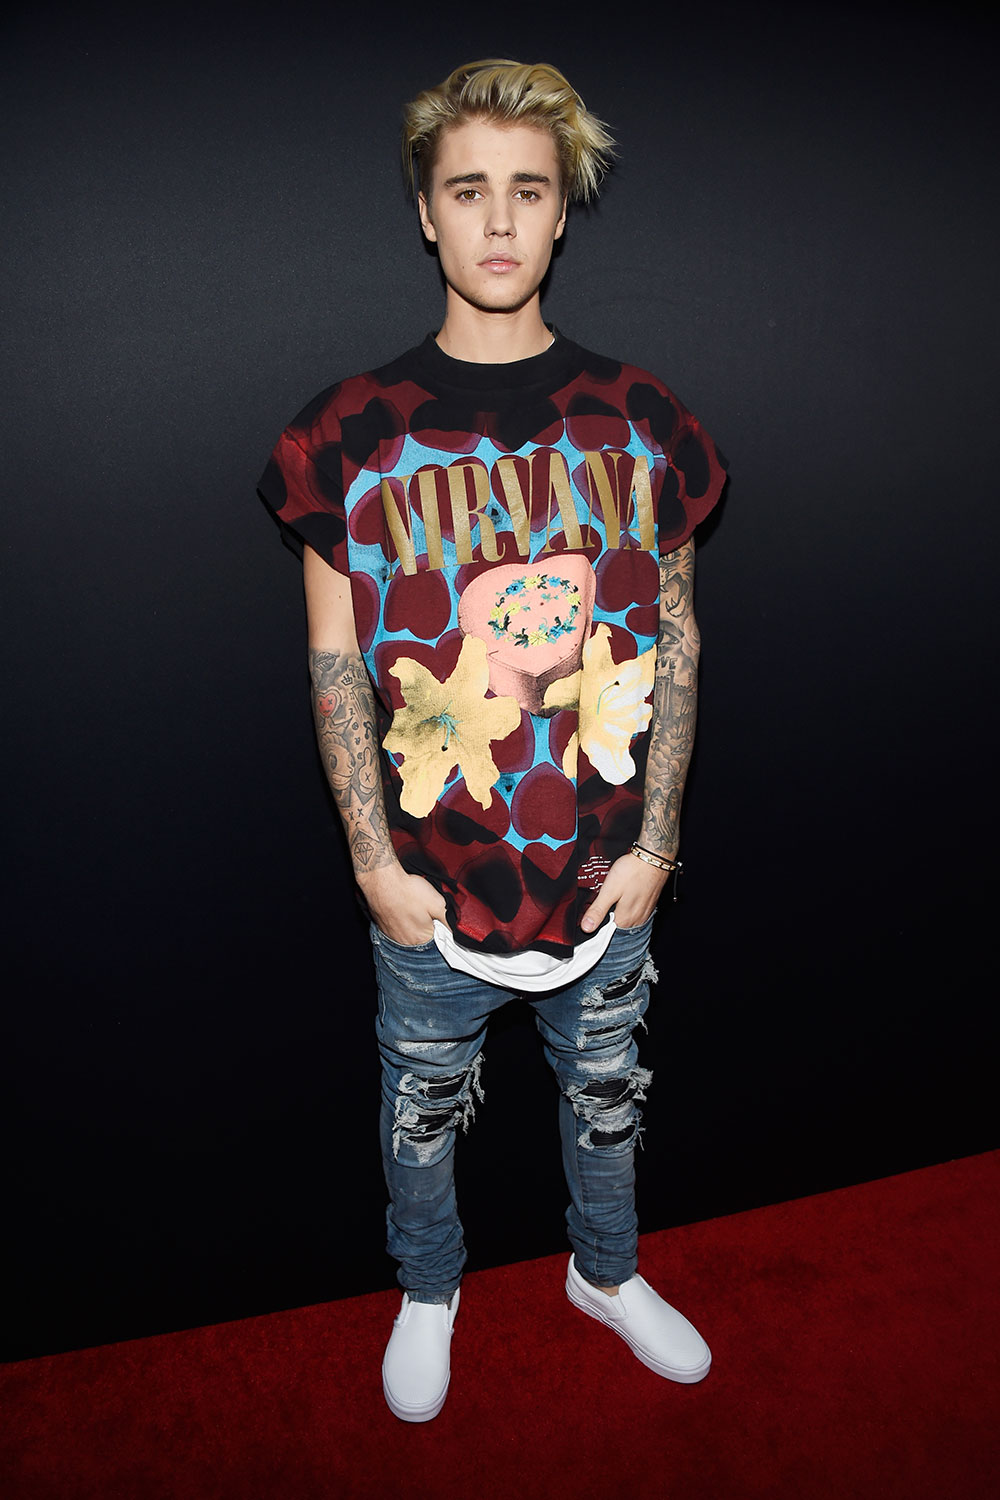 Justin Bieber pays homage to Nirvana in a t-shirt and distressed denim (meanwhile, Kurt Cobain is spinning in his grave).